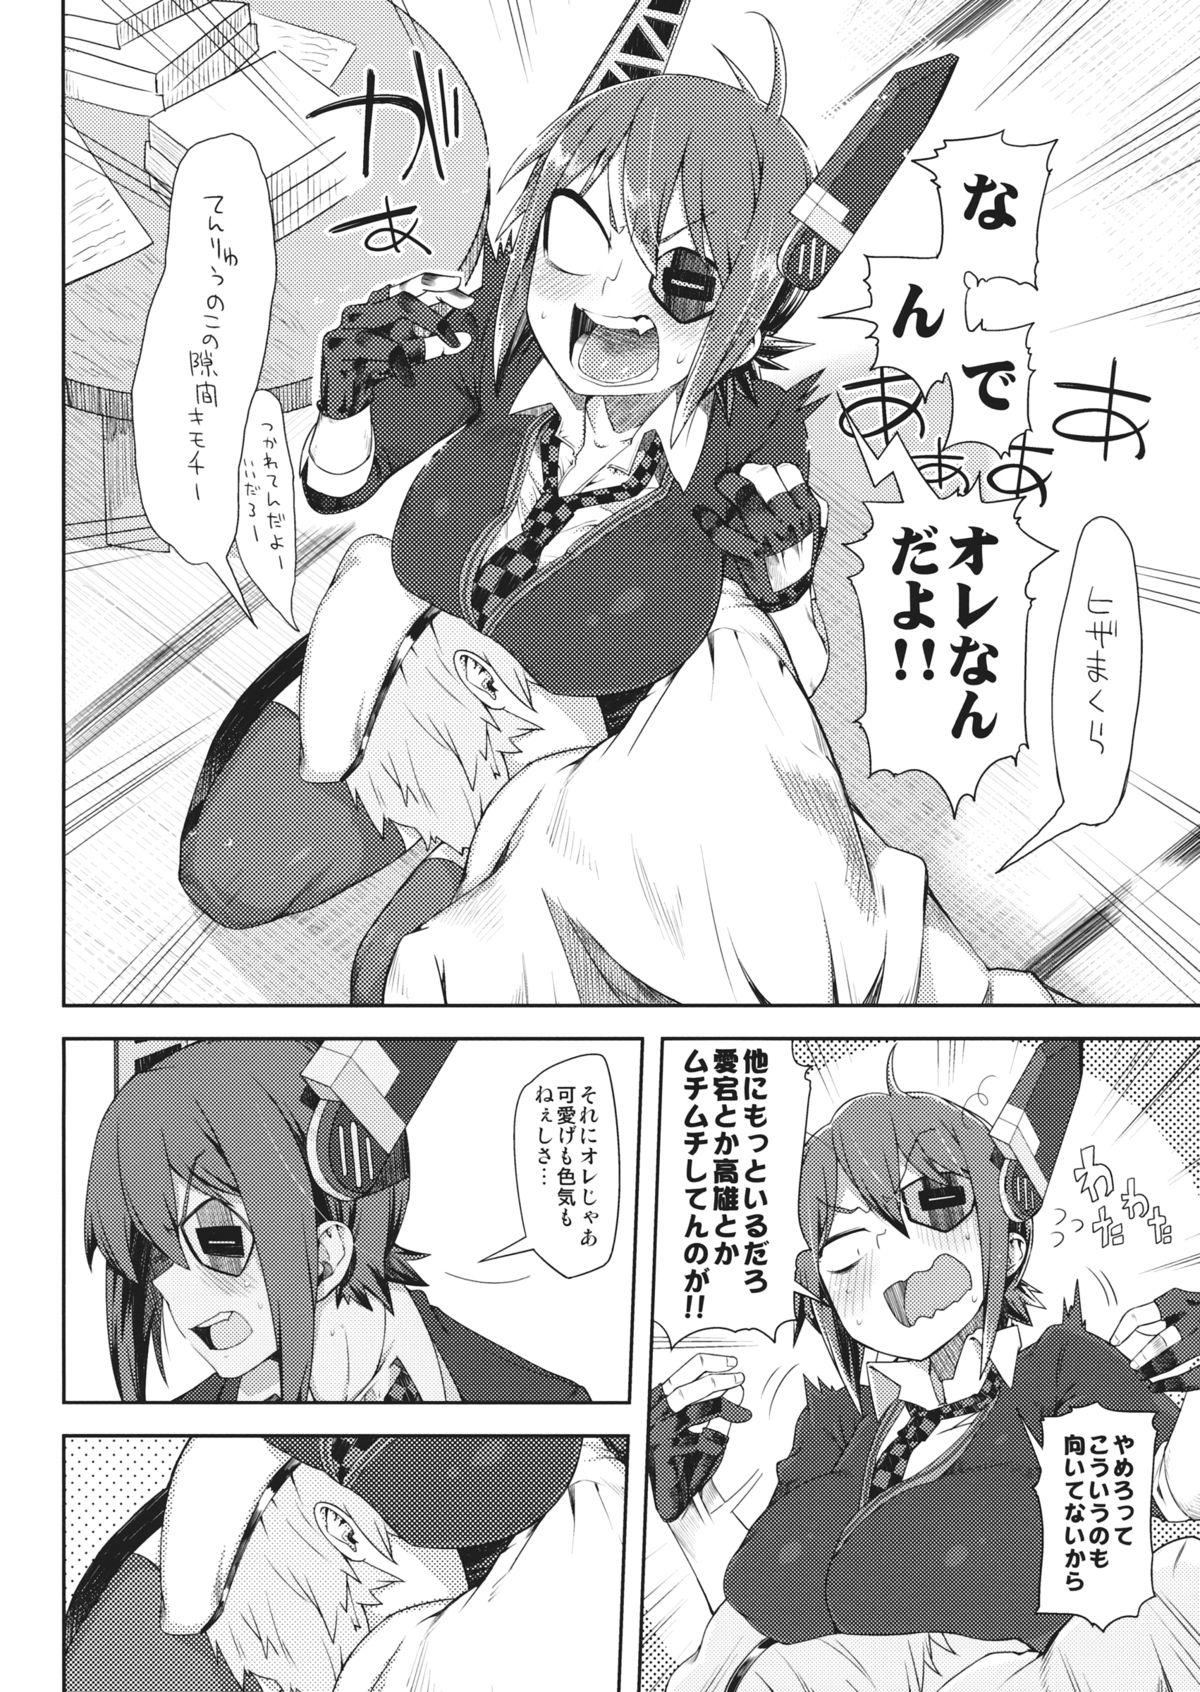 Studs STEH - Kantai collection Cunnilingus - Page 3